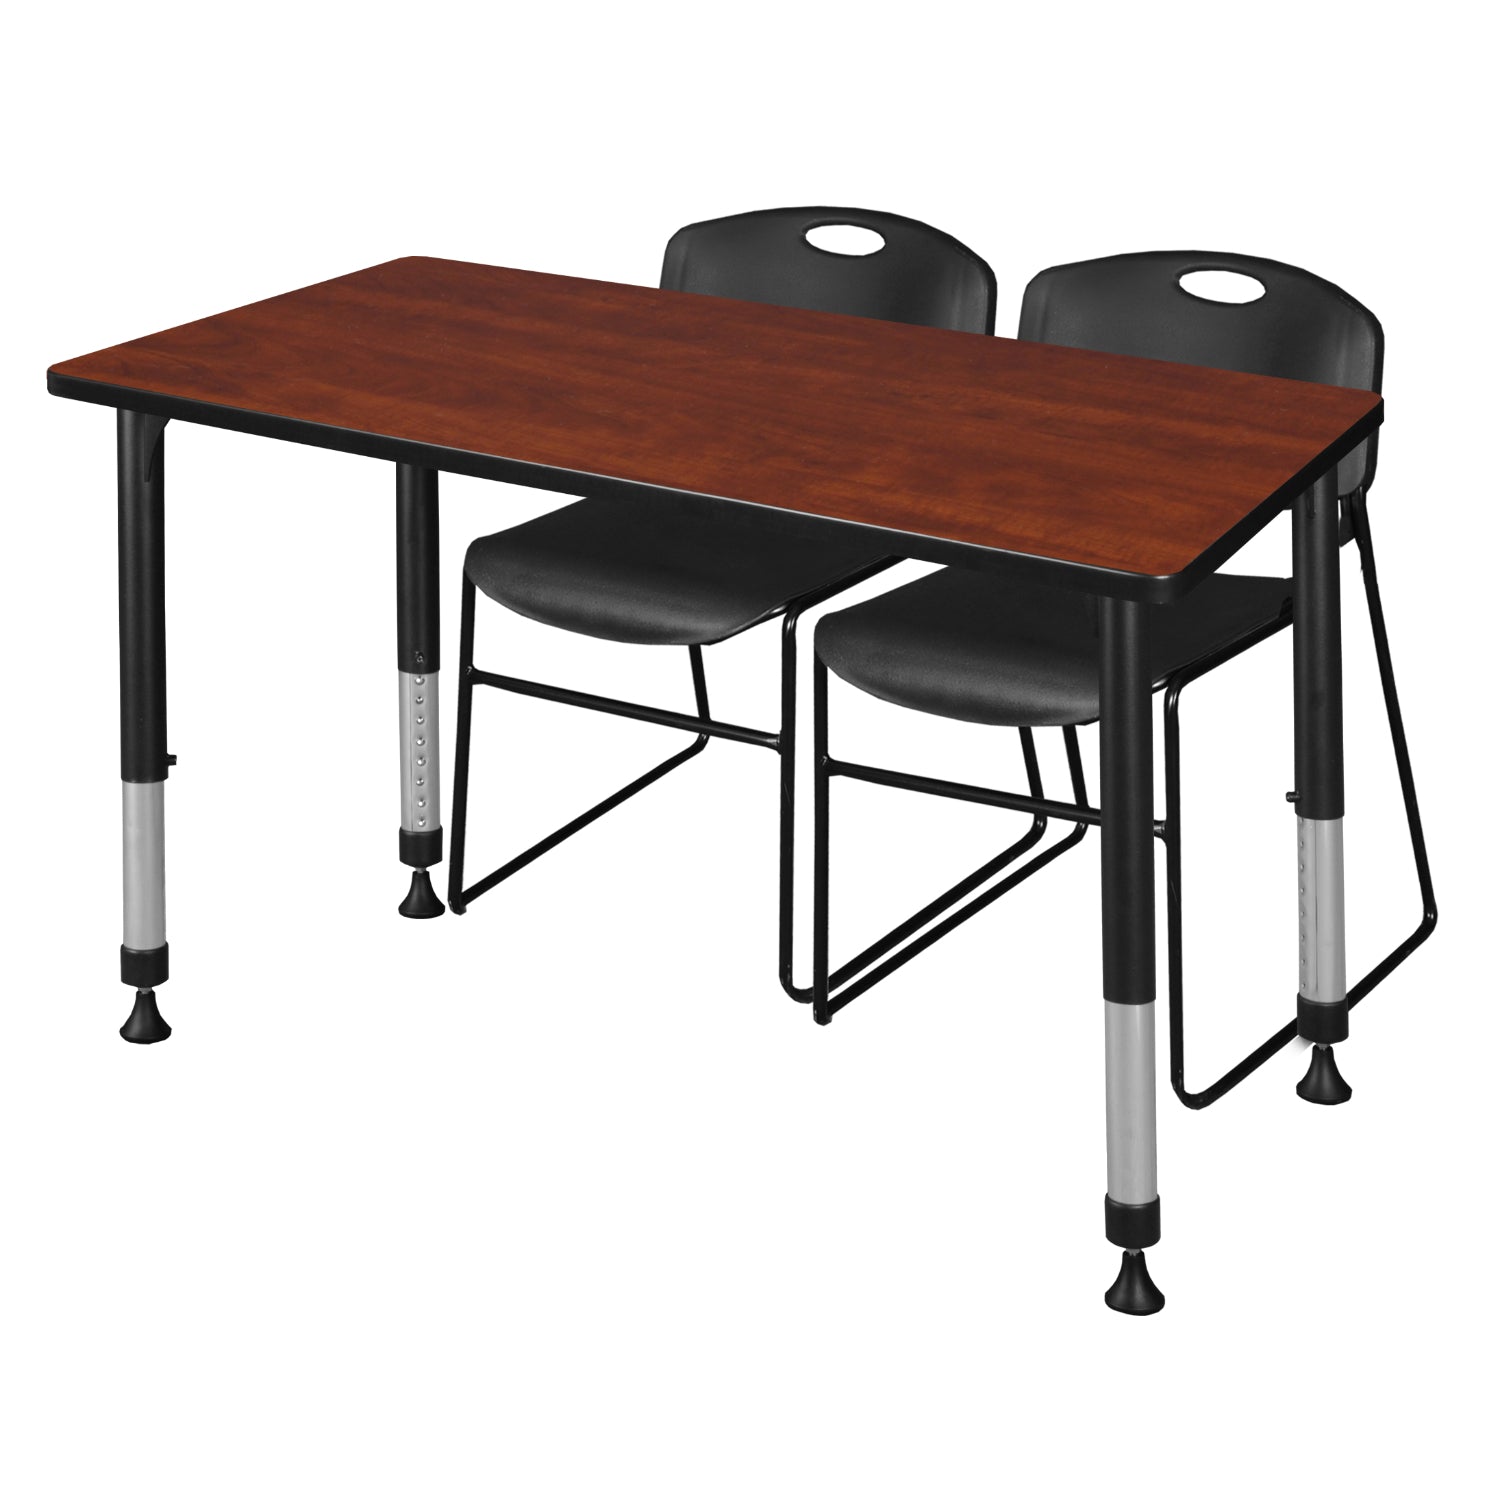 Kee Classroom Table and Chair Package, Kee 48" x 30" Rectangular Adjustable Height Table with 2 Black Zeng Stack Chairs